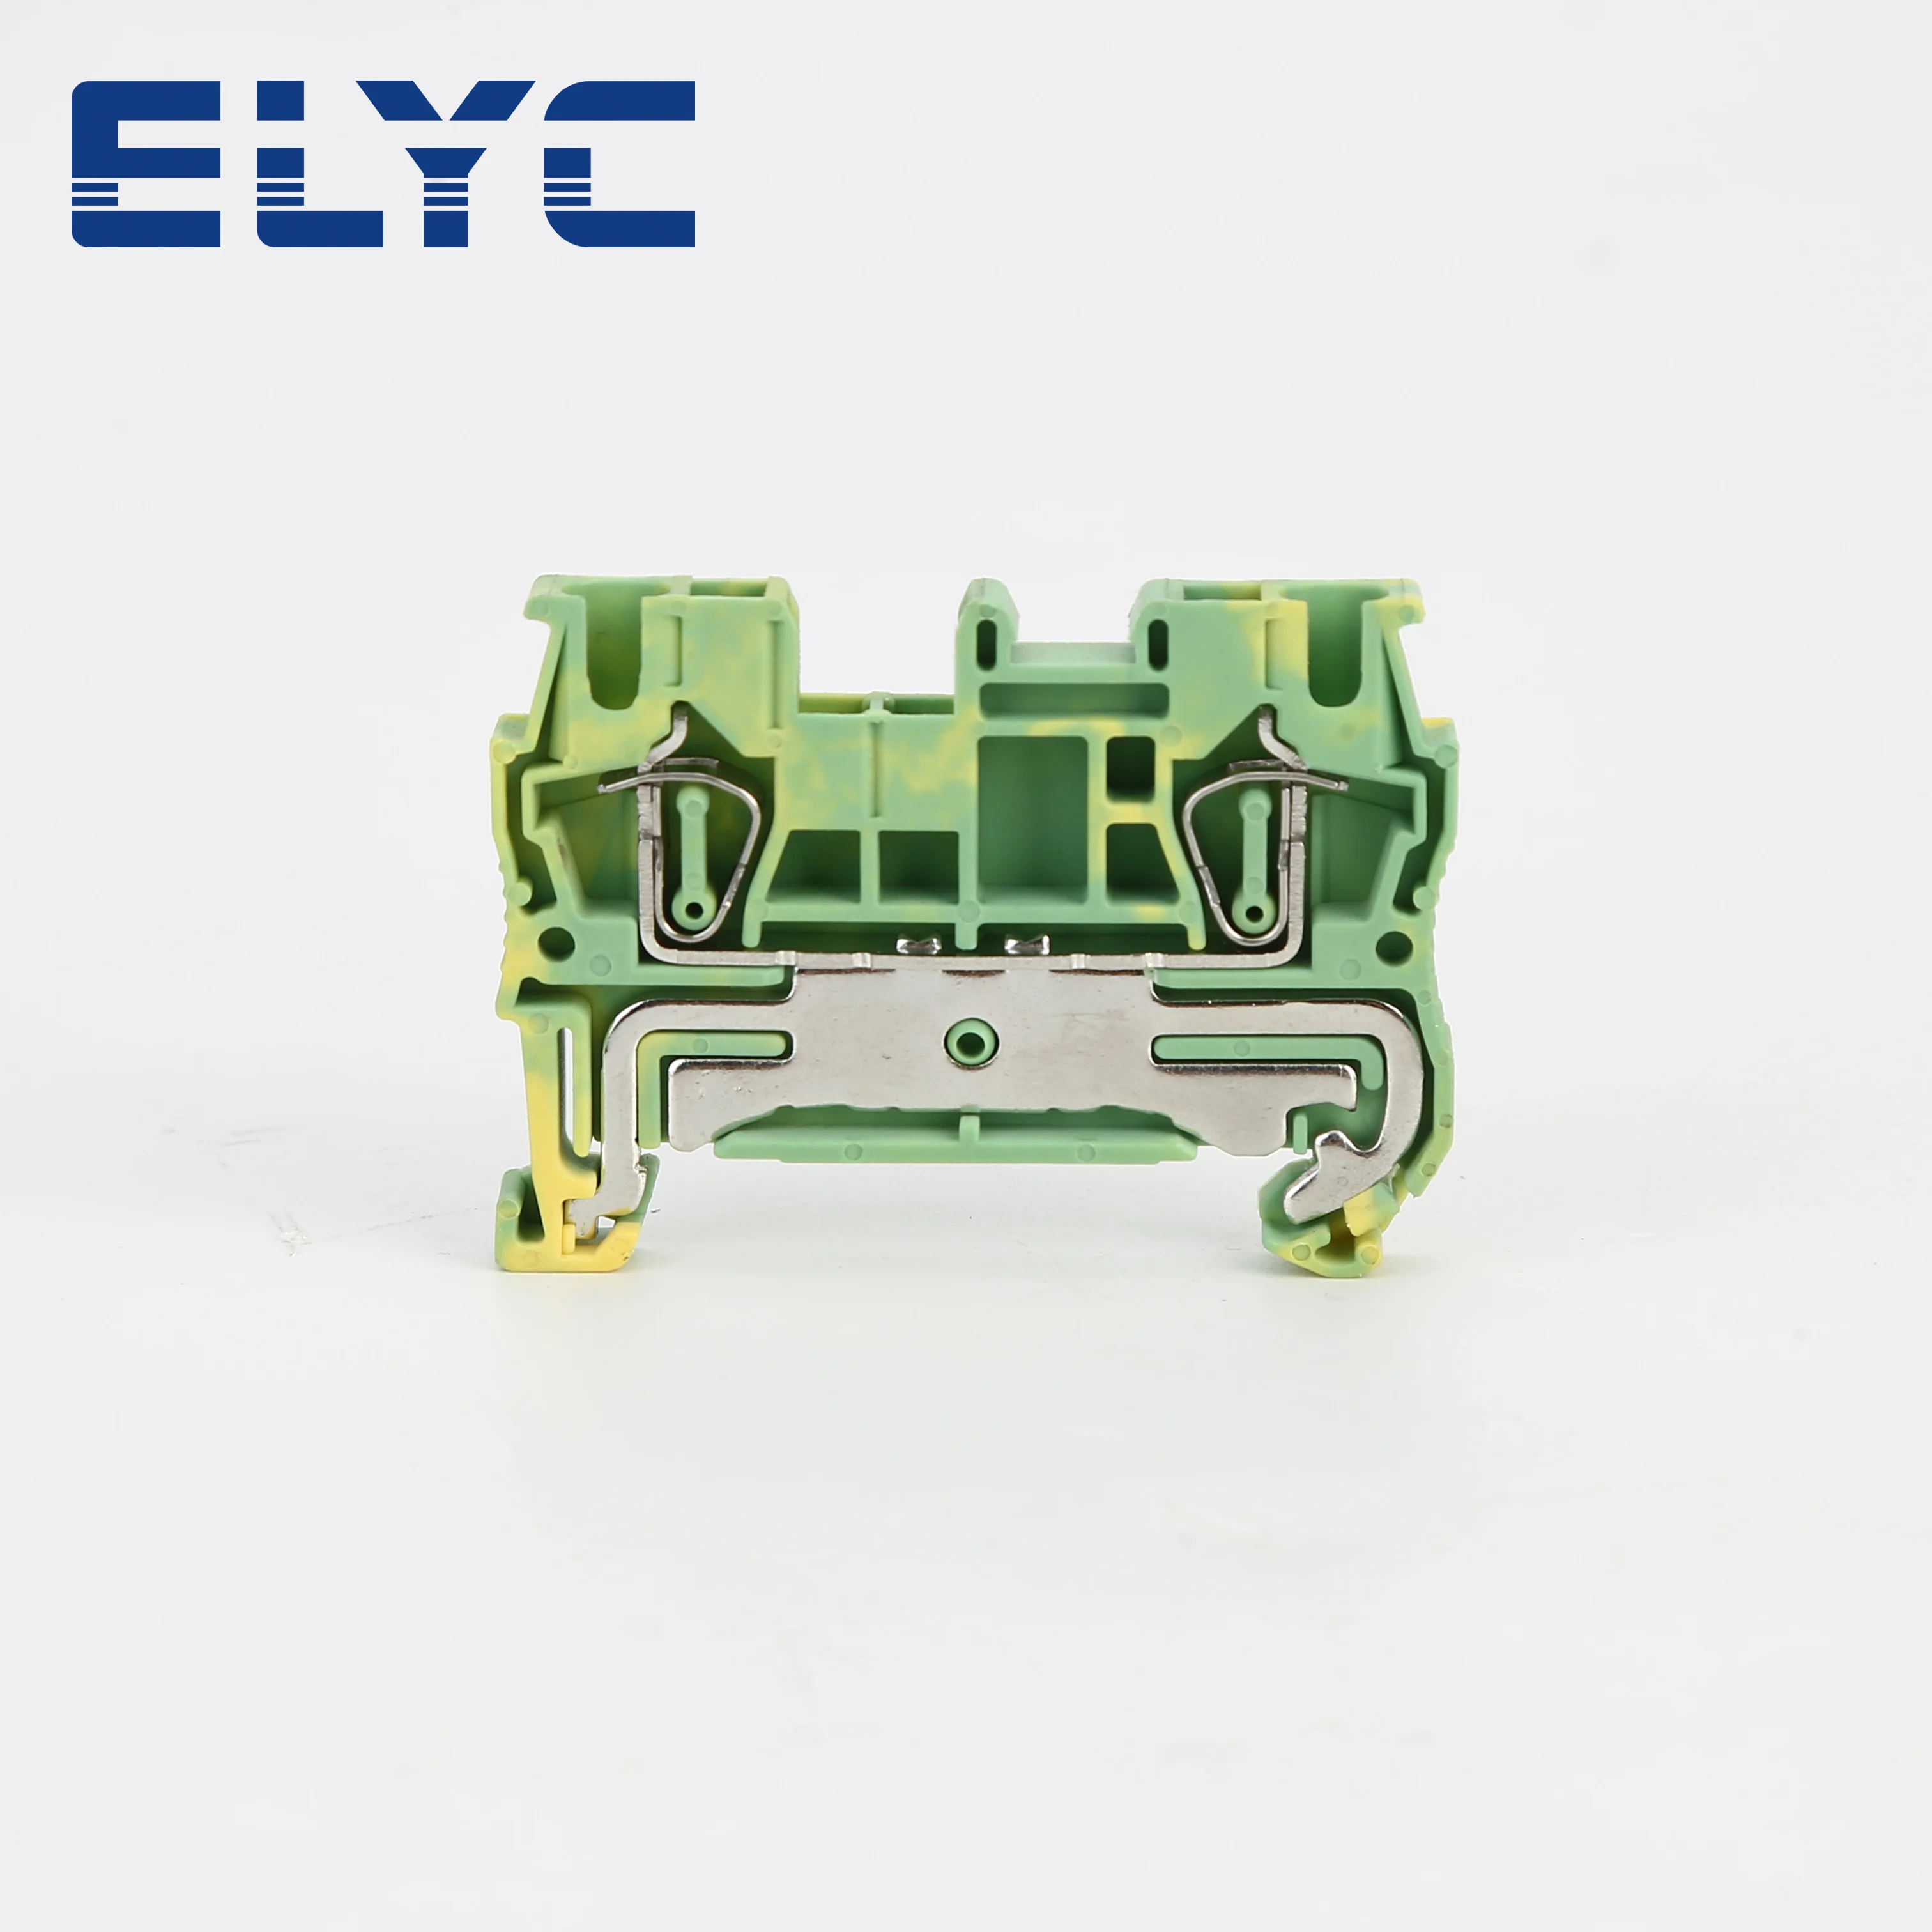 

10Pcs ST2.5-PE Ground Wire Electrical Connector Spring-cage Protective Earth Return Pull Type ST 2.5 PE Din Rail Terminal Block